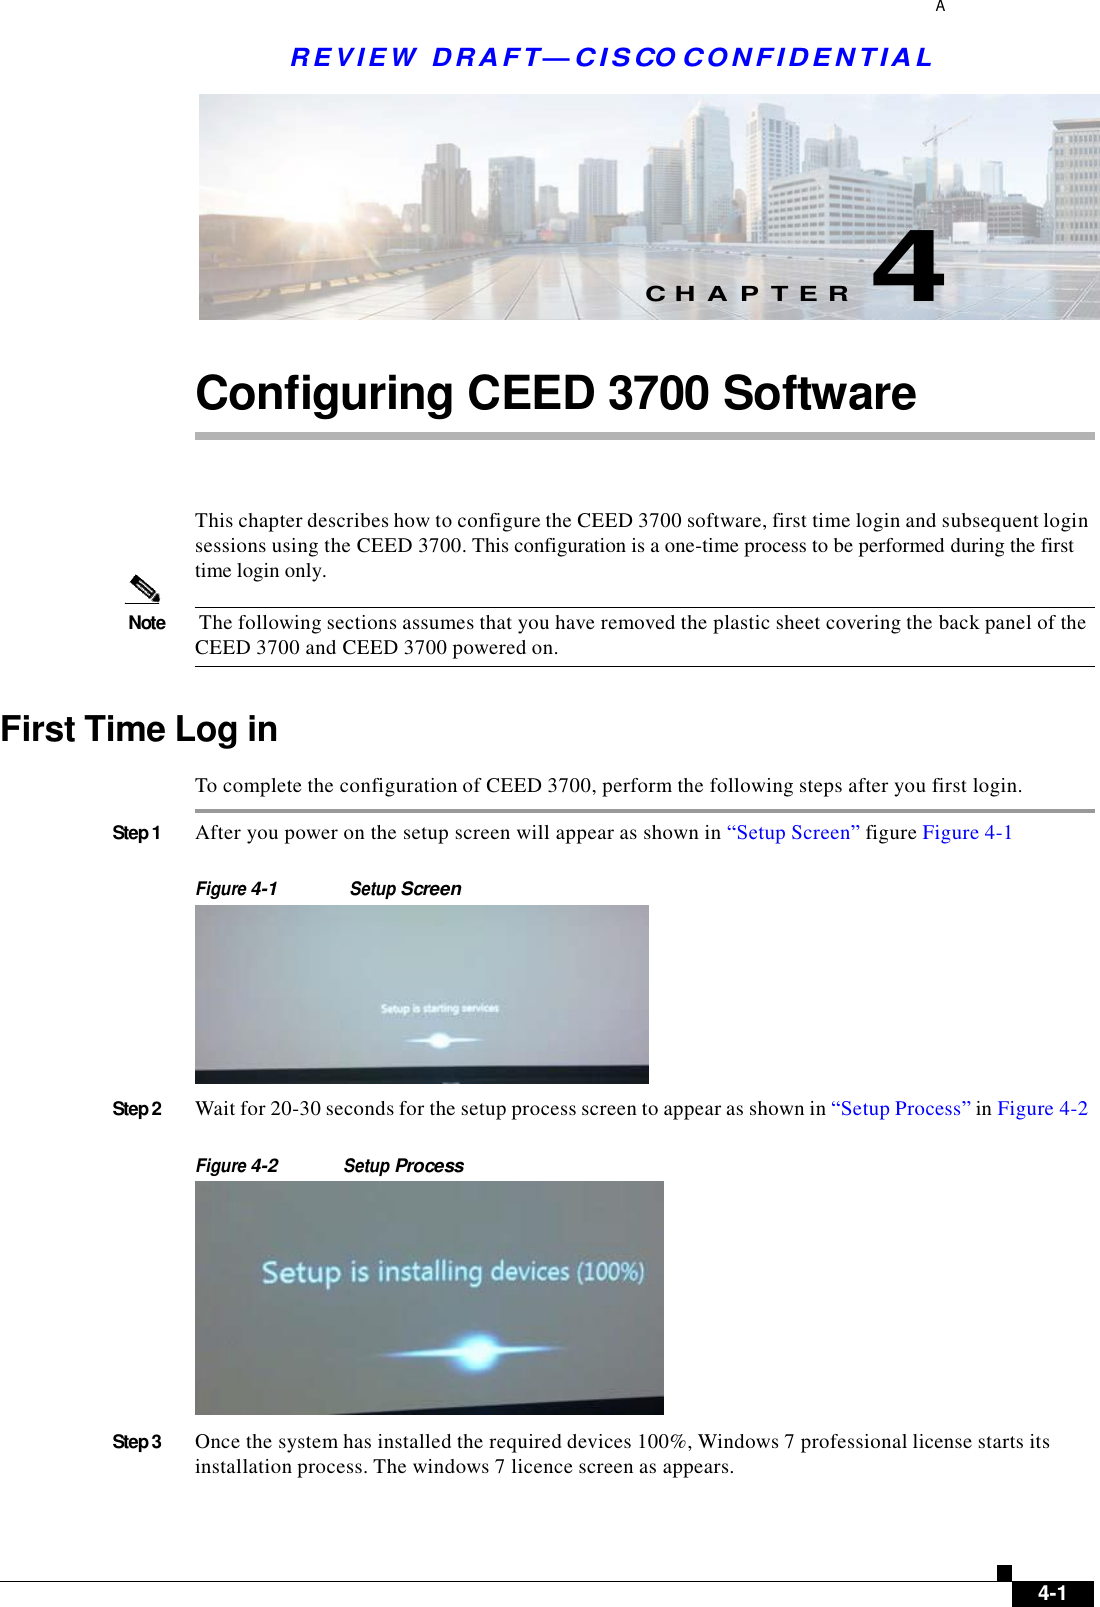  REV I E W  DRAFT— CISCO C O NF IDE N T IA L A        C H A P T E R  4   Configuring CEED 3700 Software     This chapter describes how to configure the CEED 3700 software, first time login and subsequent login sessions using the CEED 3700. This configuration is a one-time process to be performed during the first time login only.   Note  The following sections assumes that you have removed the plastic sheet covering the back panel of the CEED 3700 and CEED 3700 powered on.   First Time Log in  To complete the configuration of CEED 3700, perform the following steps after you first login.  Step 1  After you power on the setup screen will appear as shown in “Setup Screen” figure Figure 4-1   Figure 4-1 Setup Screen   Step 2  Wait for 20-30 seconds for the setup process screen to appear as shown in “Setup Process” in Figure 4-2   Figure 4-2 Setup Process   Step 3  Once the system has installed the required devices 100%, Windows 7 professional license starts its installation process. The windows 7 licence screen as appears.          4-1 